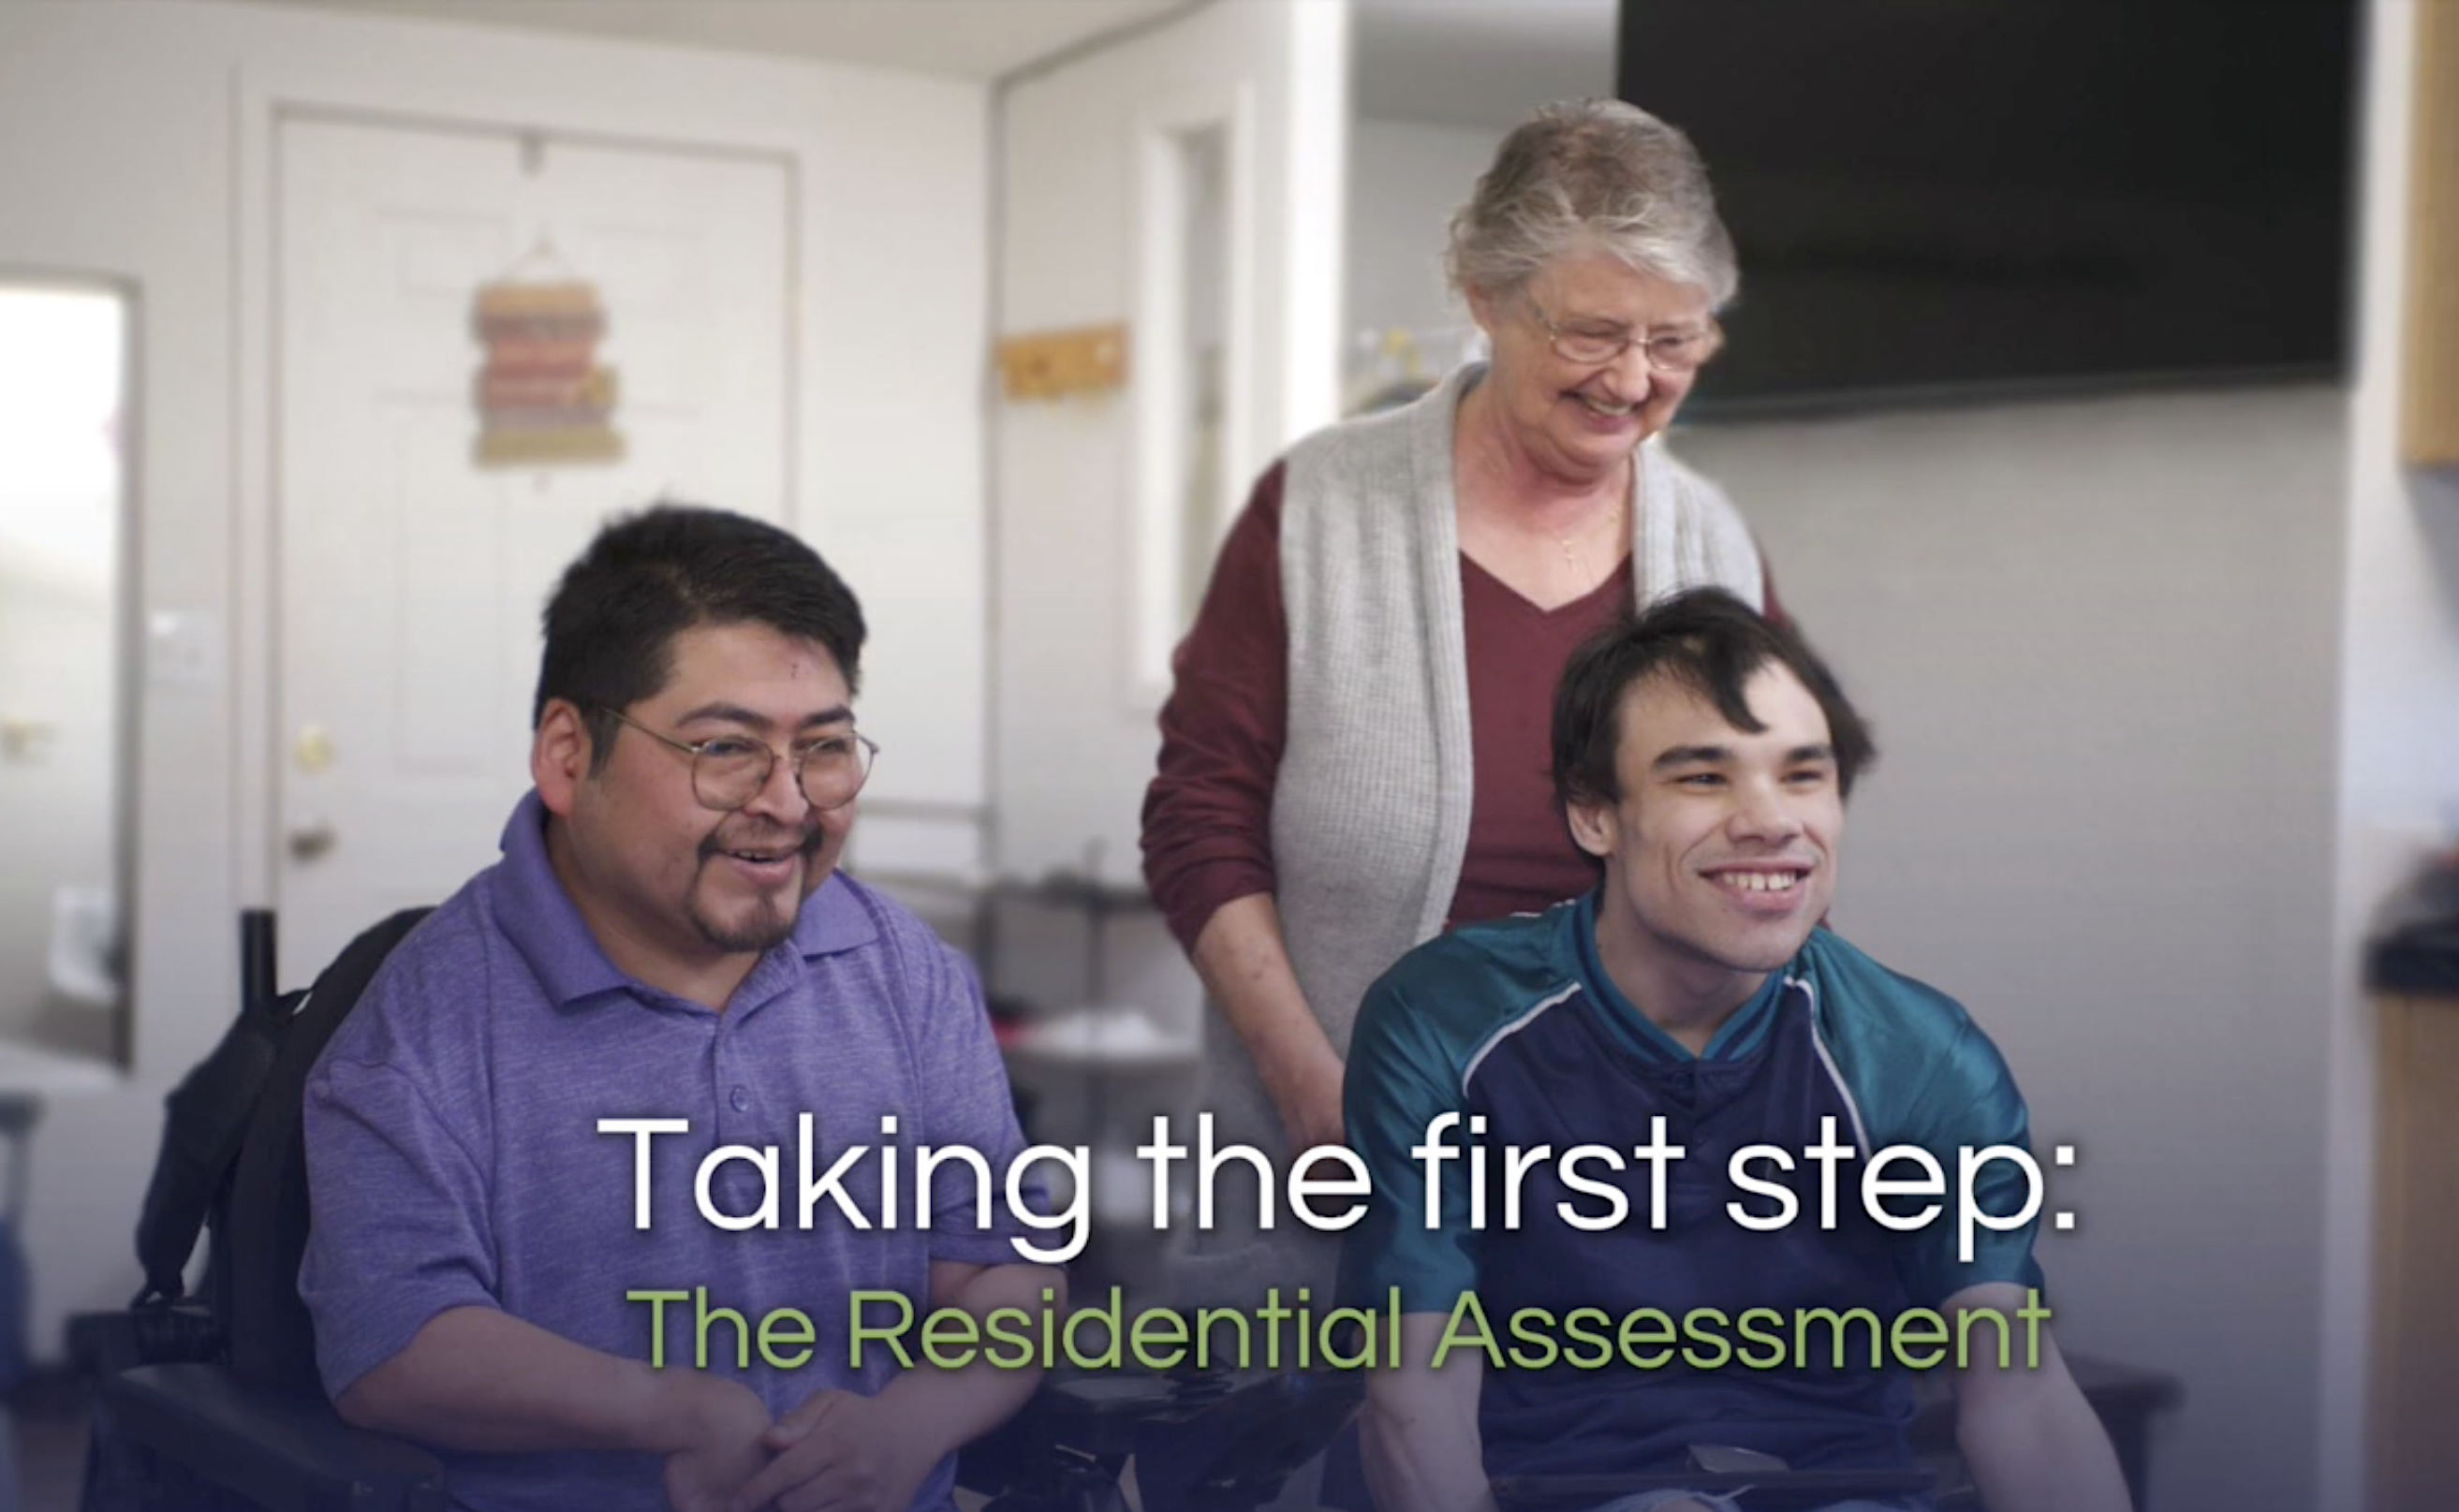 two young men in wheelchair are smiling while an older woman in glasses stands behind the man on the right, also smiling. Text on screen is on two lines, the top row in white and bottom row in green, and it reads: Taking the first step: The Residential Assessment